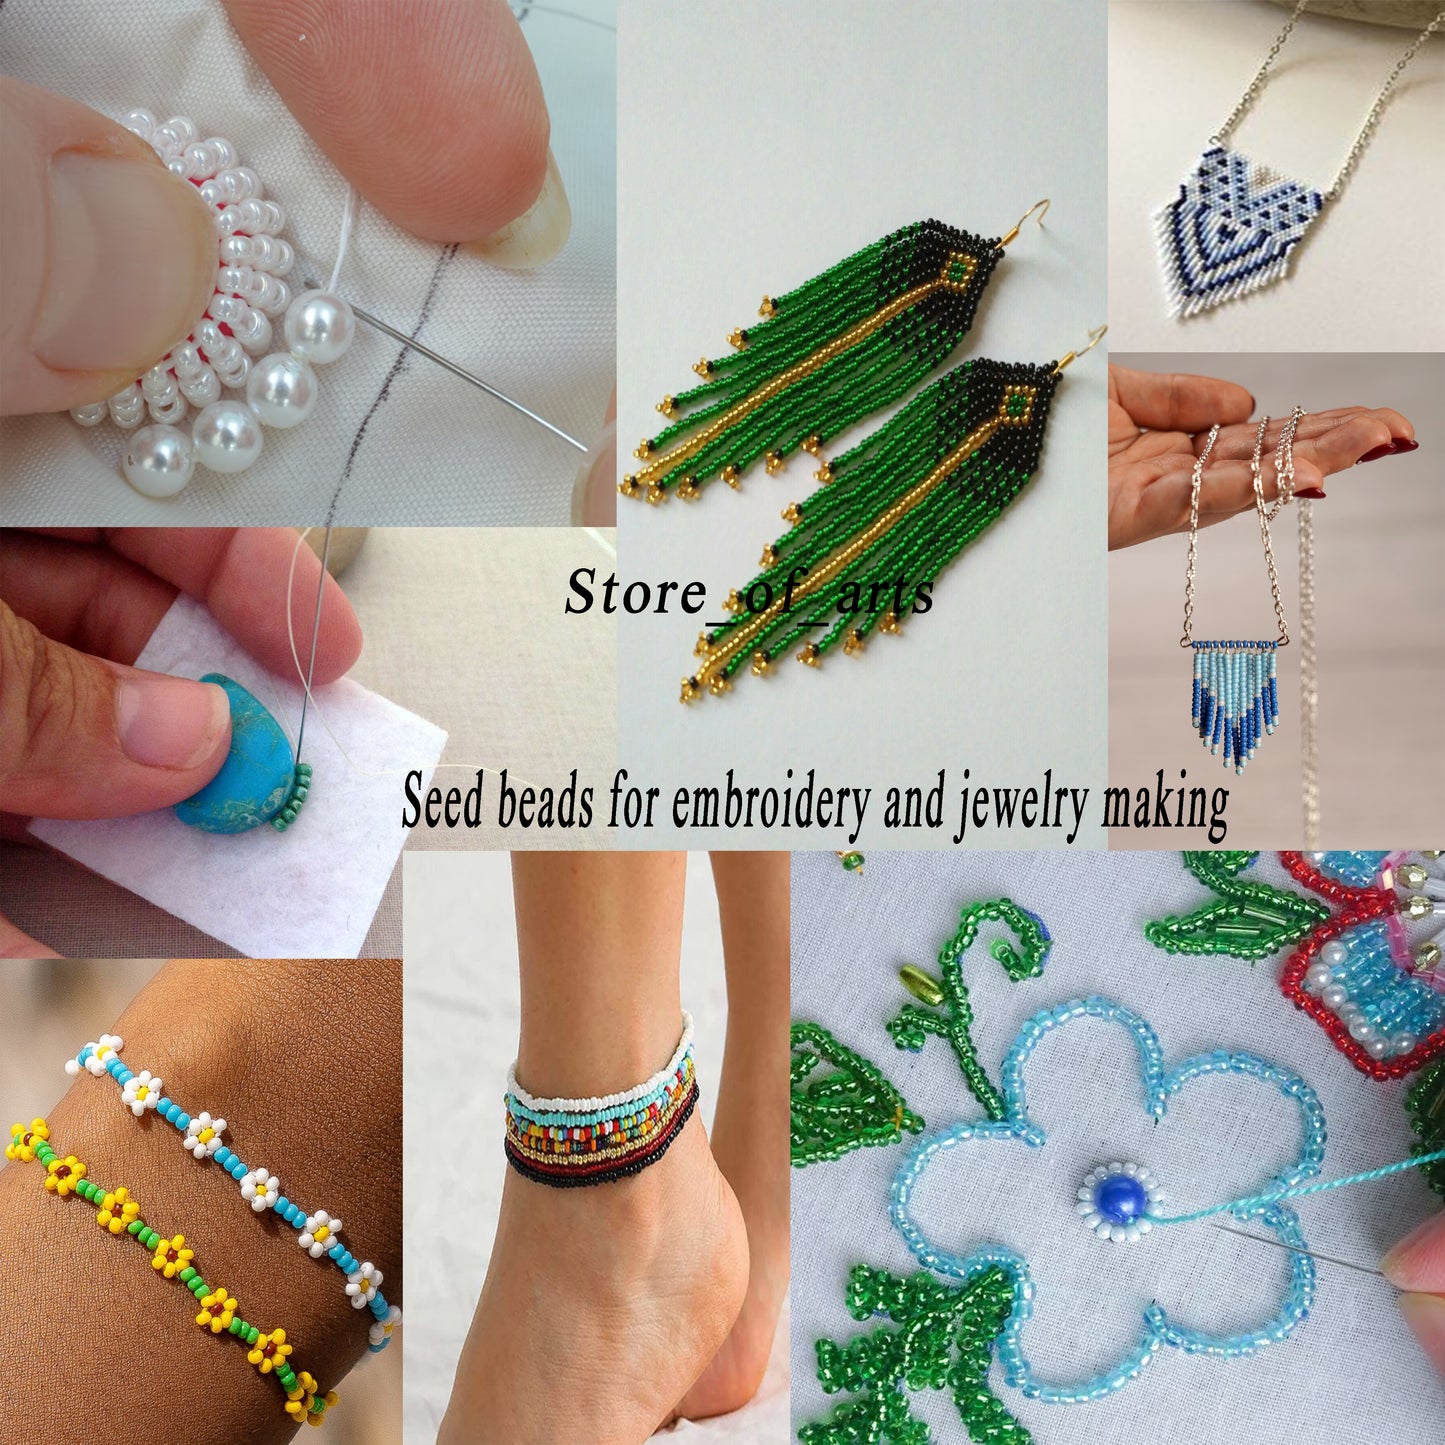 Seed beads kit of 2mm (11/0) and 6mm pearl beads for Jewelry